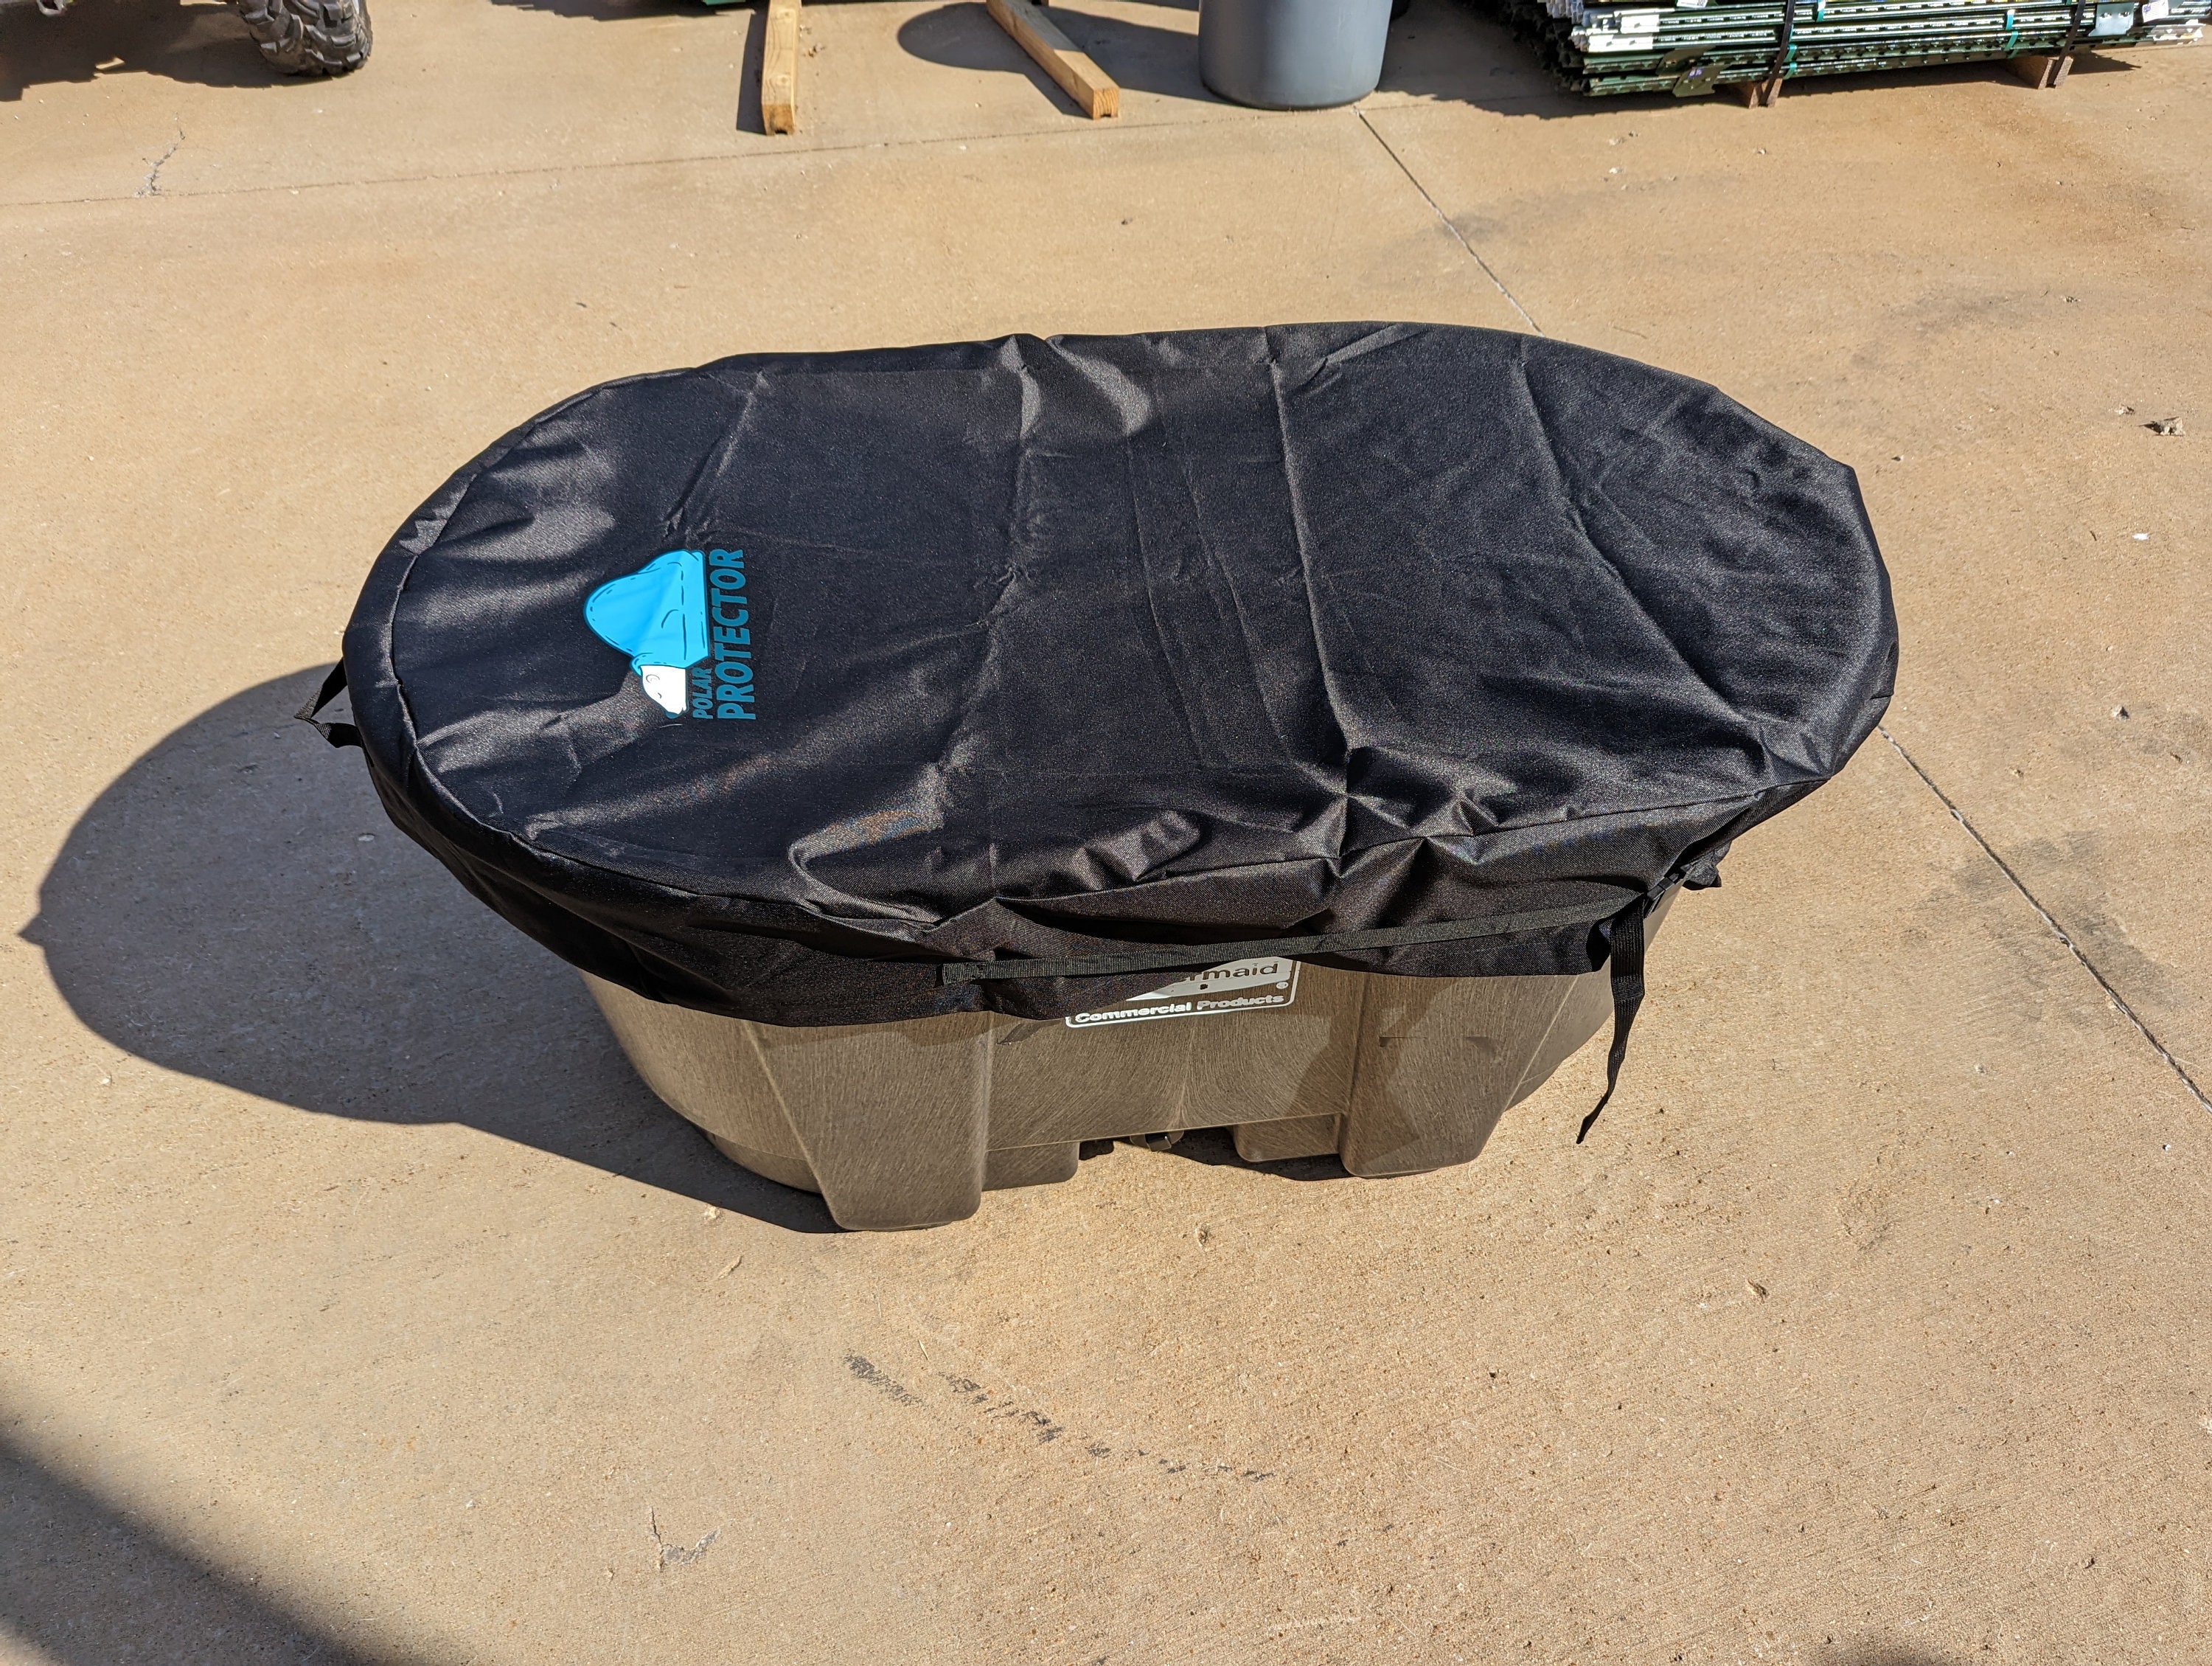 Waterproof Stock Tank Cover for 150 Gallon Rubbermaid Stock Water Tank Pool  Pond Cover Ice Bath Hot Tub Cover Oval - Yahoo Shopping